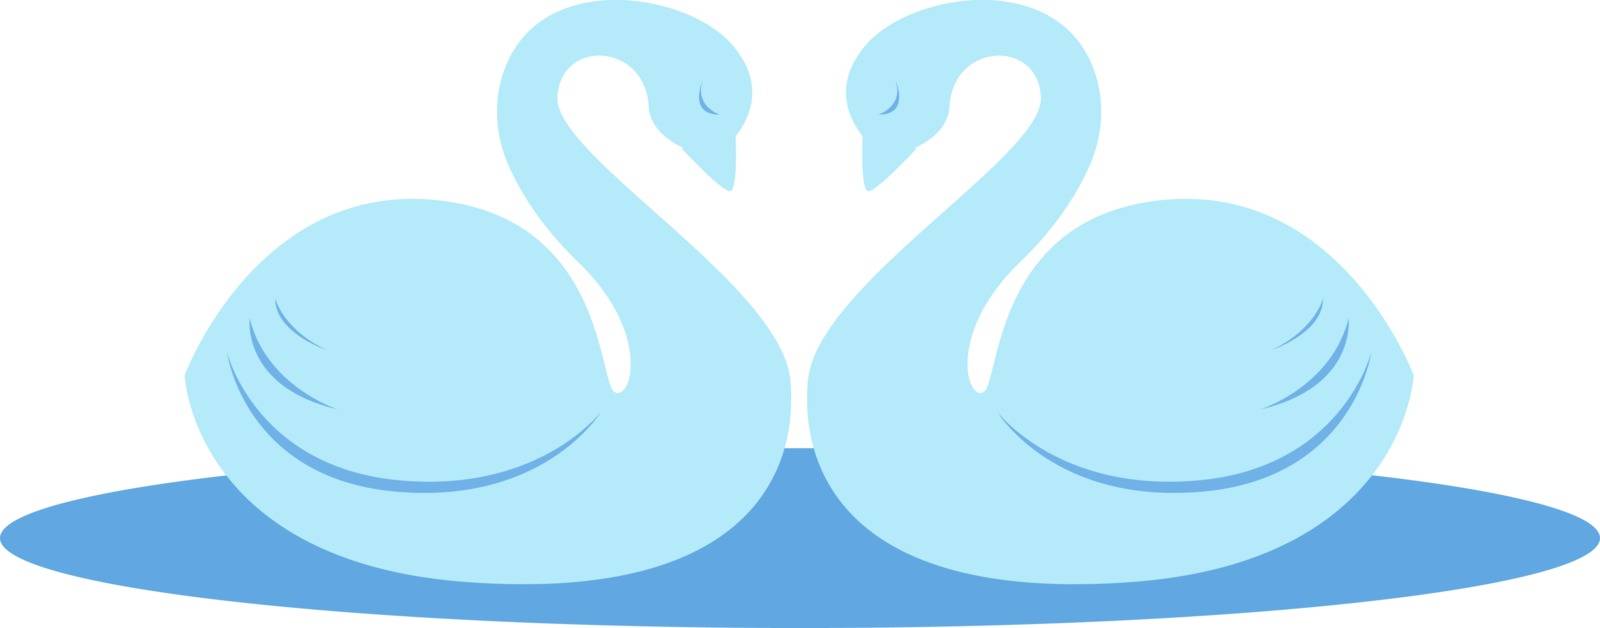 Pair of swans, illustration, vector on white background.